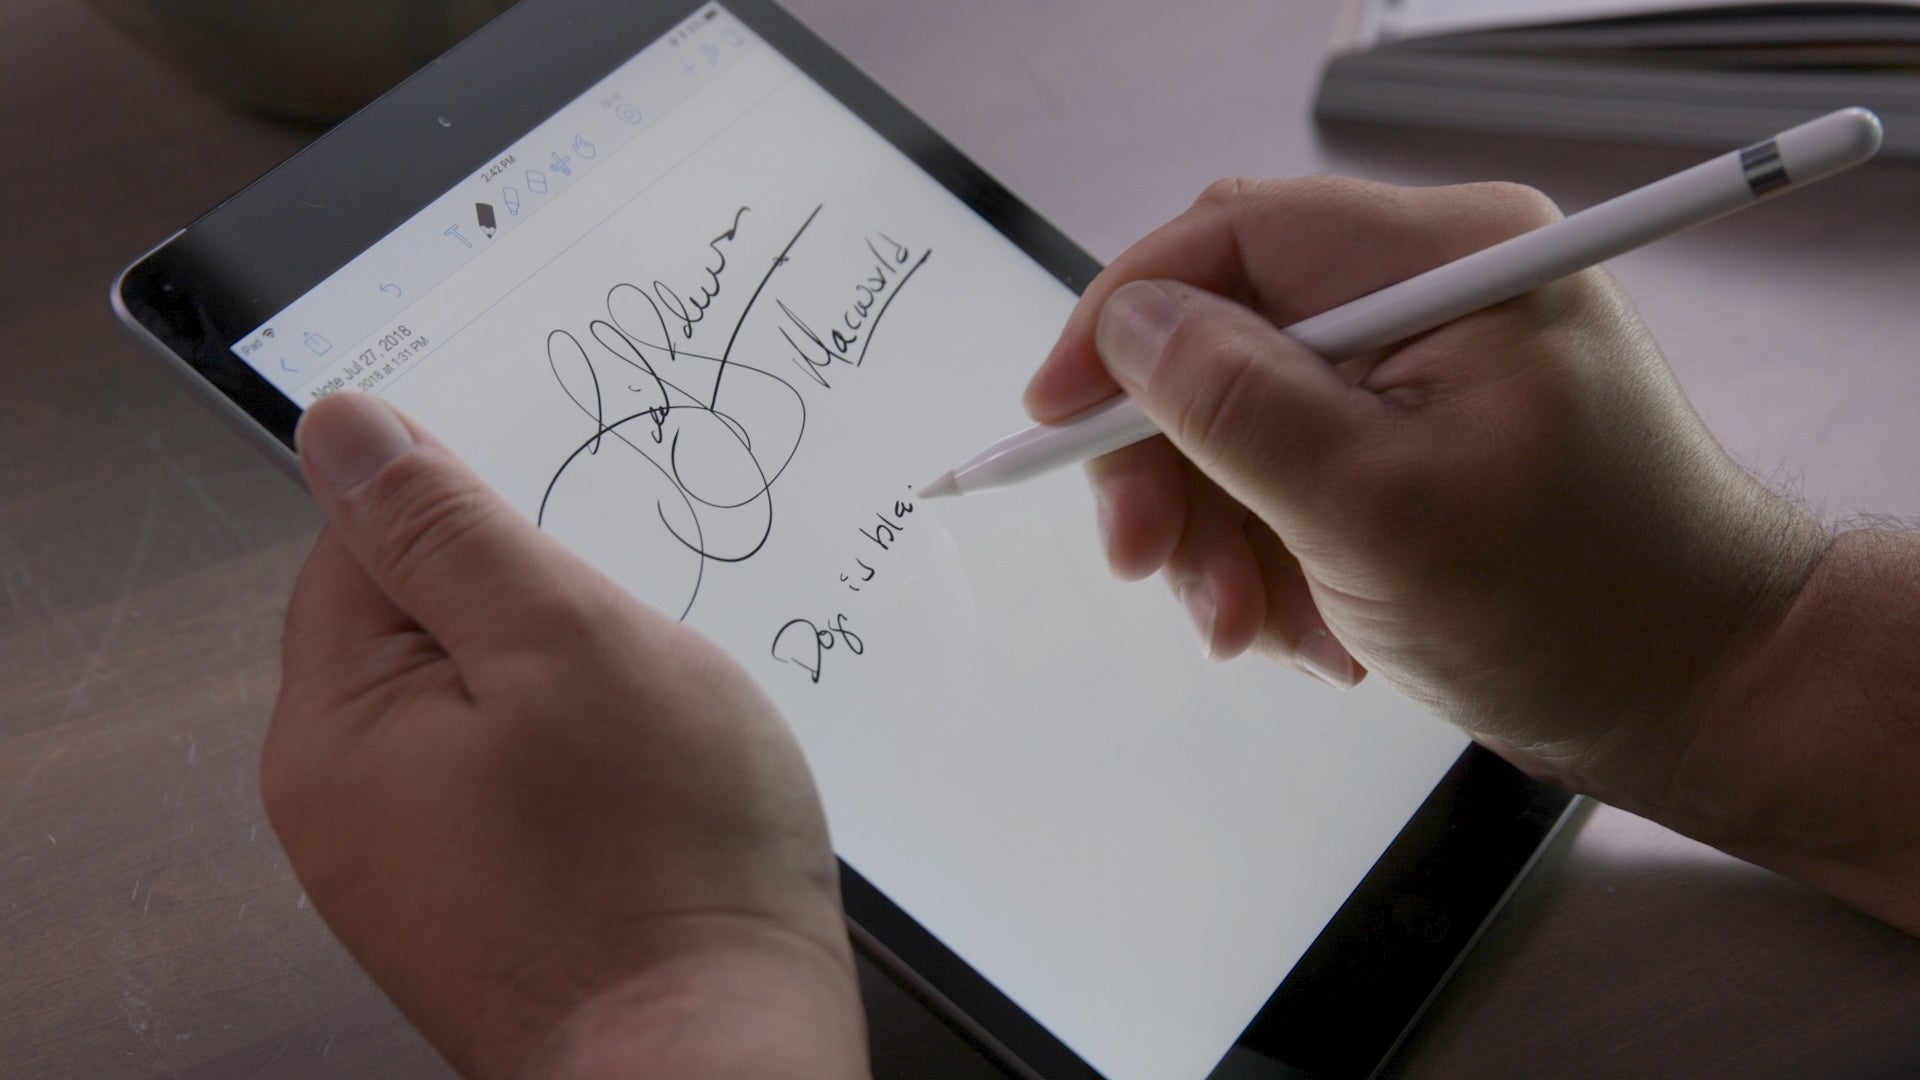 the-best-note-taking-apps-for-the-ipad-and-apple-pencil-idg-tv